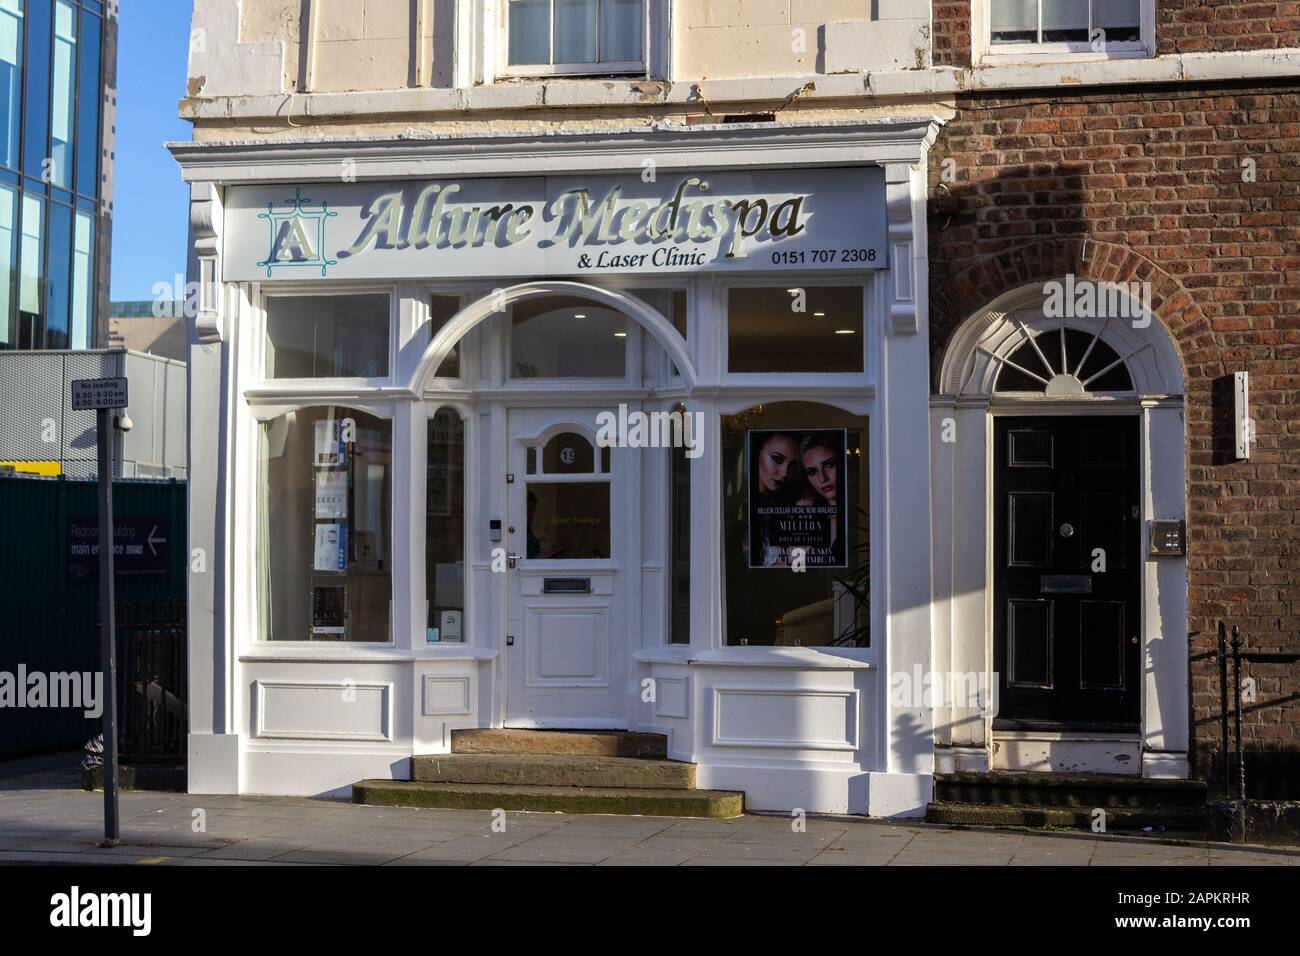 Allure Medispa and Laser hair treatment and skin clinic, Clarence street, Liverpool Stock Photo